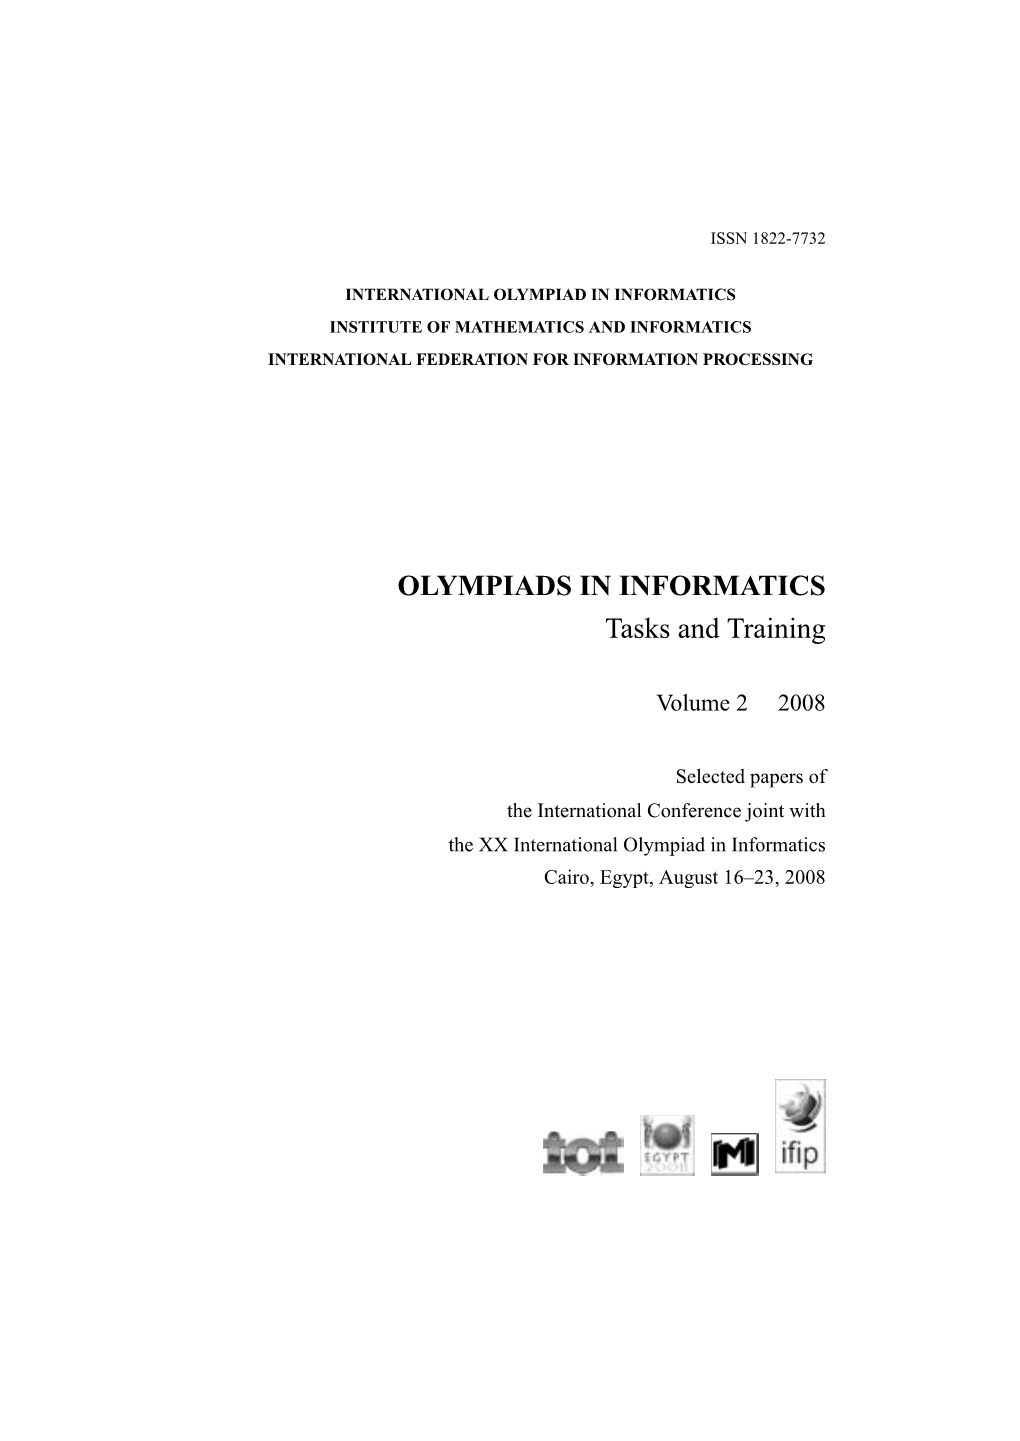 OLYMPIADS in INFORMATICS Tasks and Training